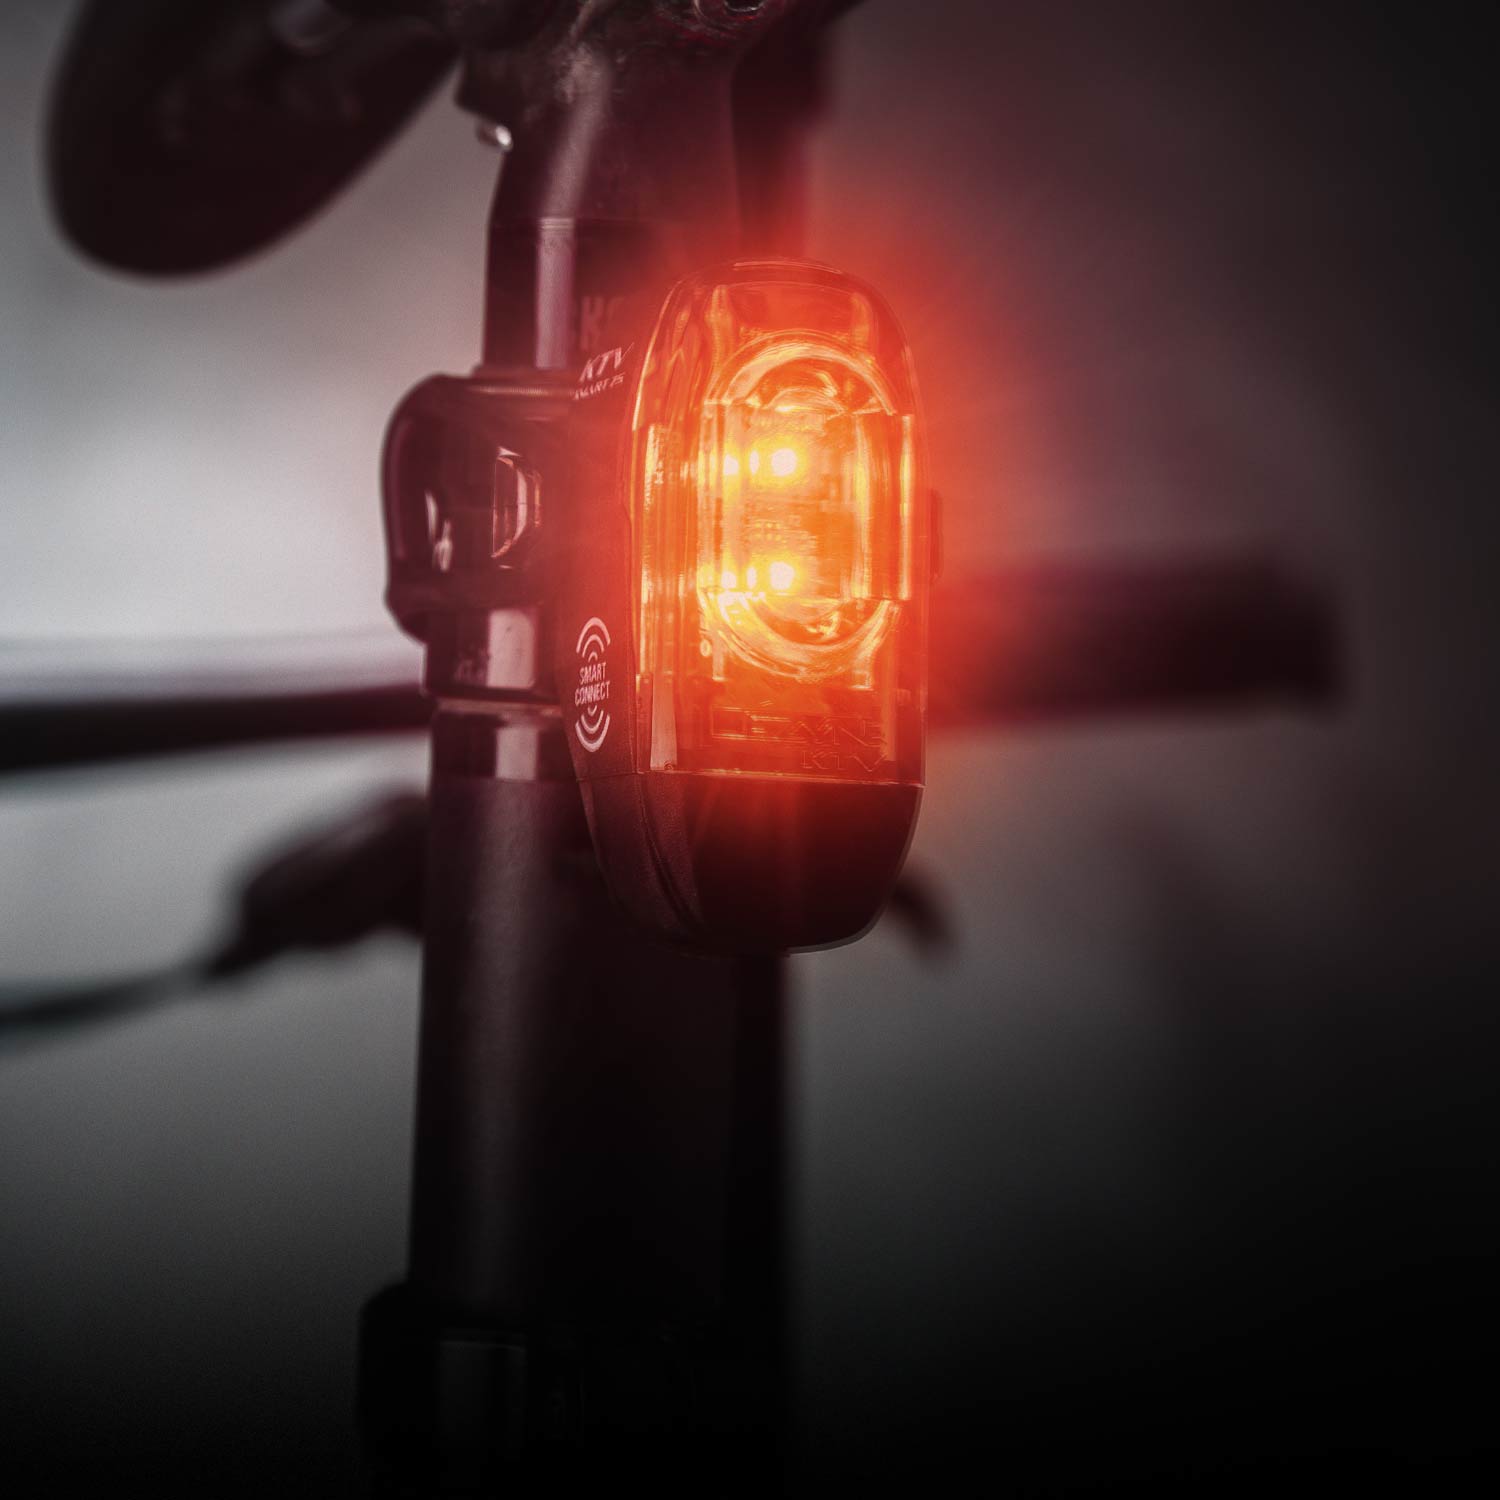 A rear bicycle light mounted on a seat post. The smart connect and KTV logos are visible on the side of the light.